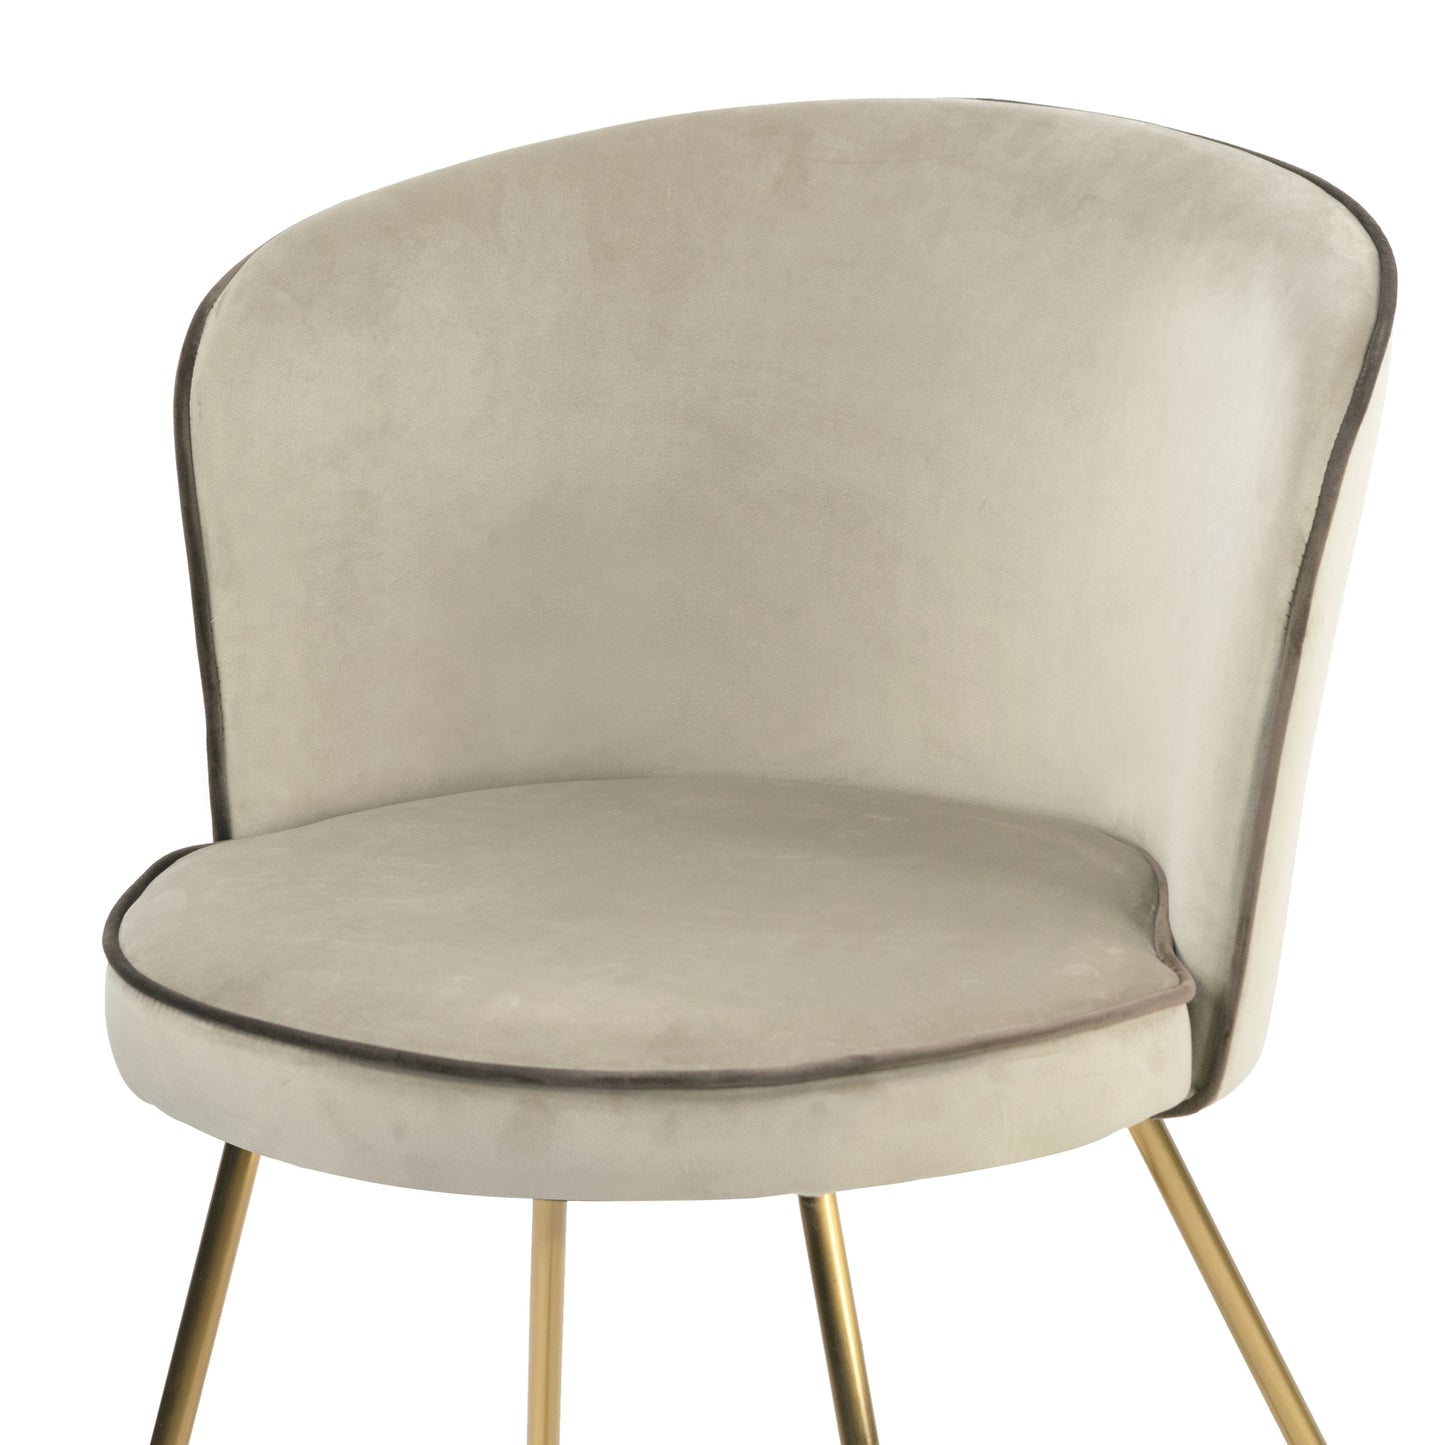 Set of 2 Anila Beige Velvet Dining Chair with Contrasting Piping and Golden Metal Legs